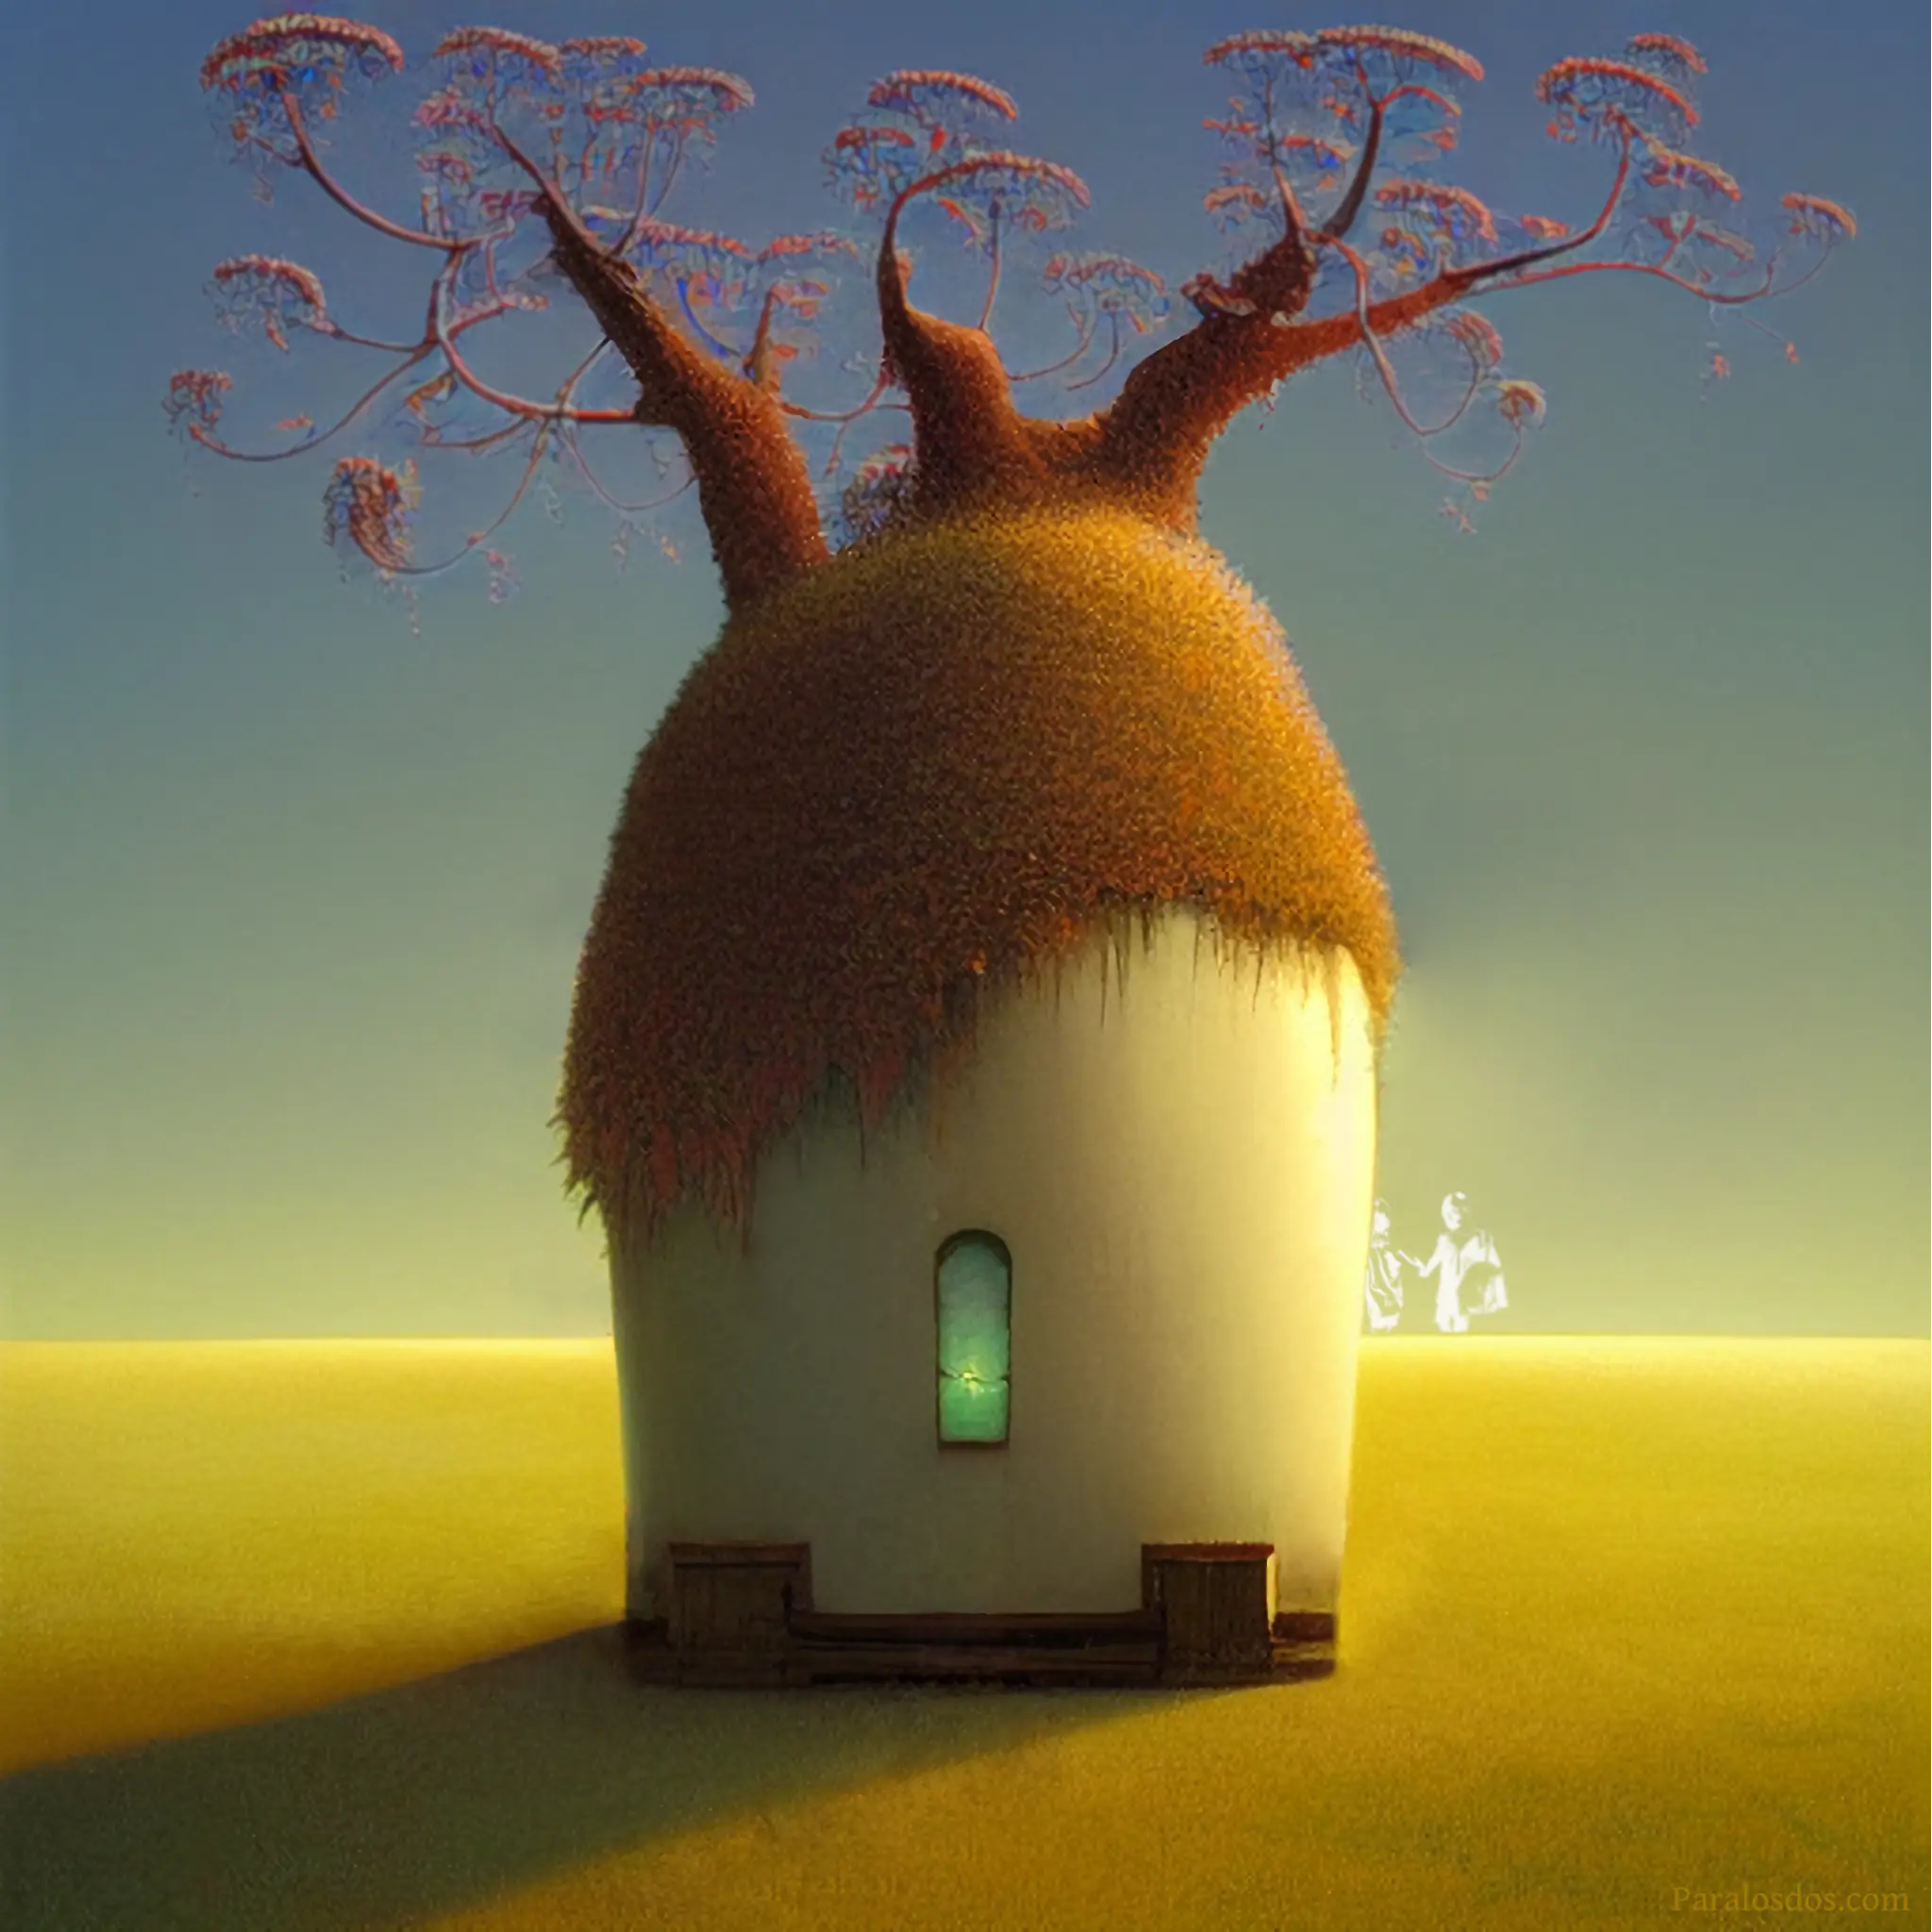 An artistic rendering of a weird hobbit/Dr. Seuss like house with trees growing out of the roof. There is nothing else but a glowing horizon in the background.